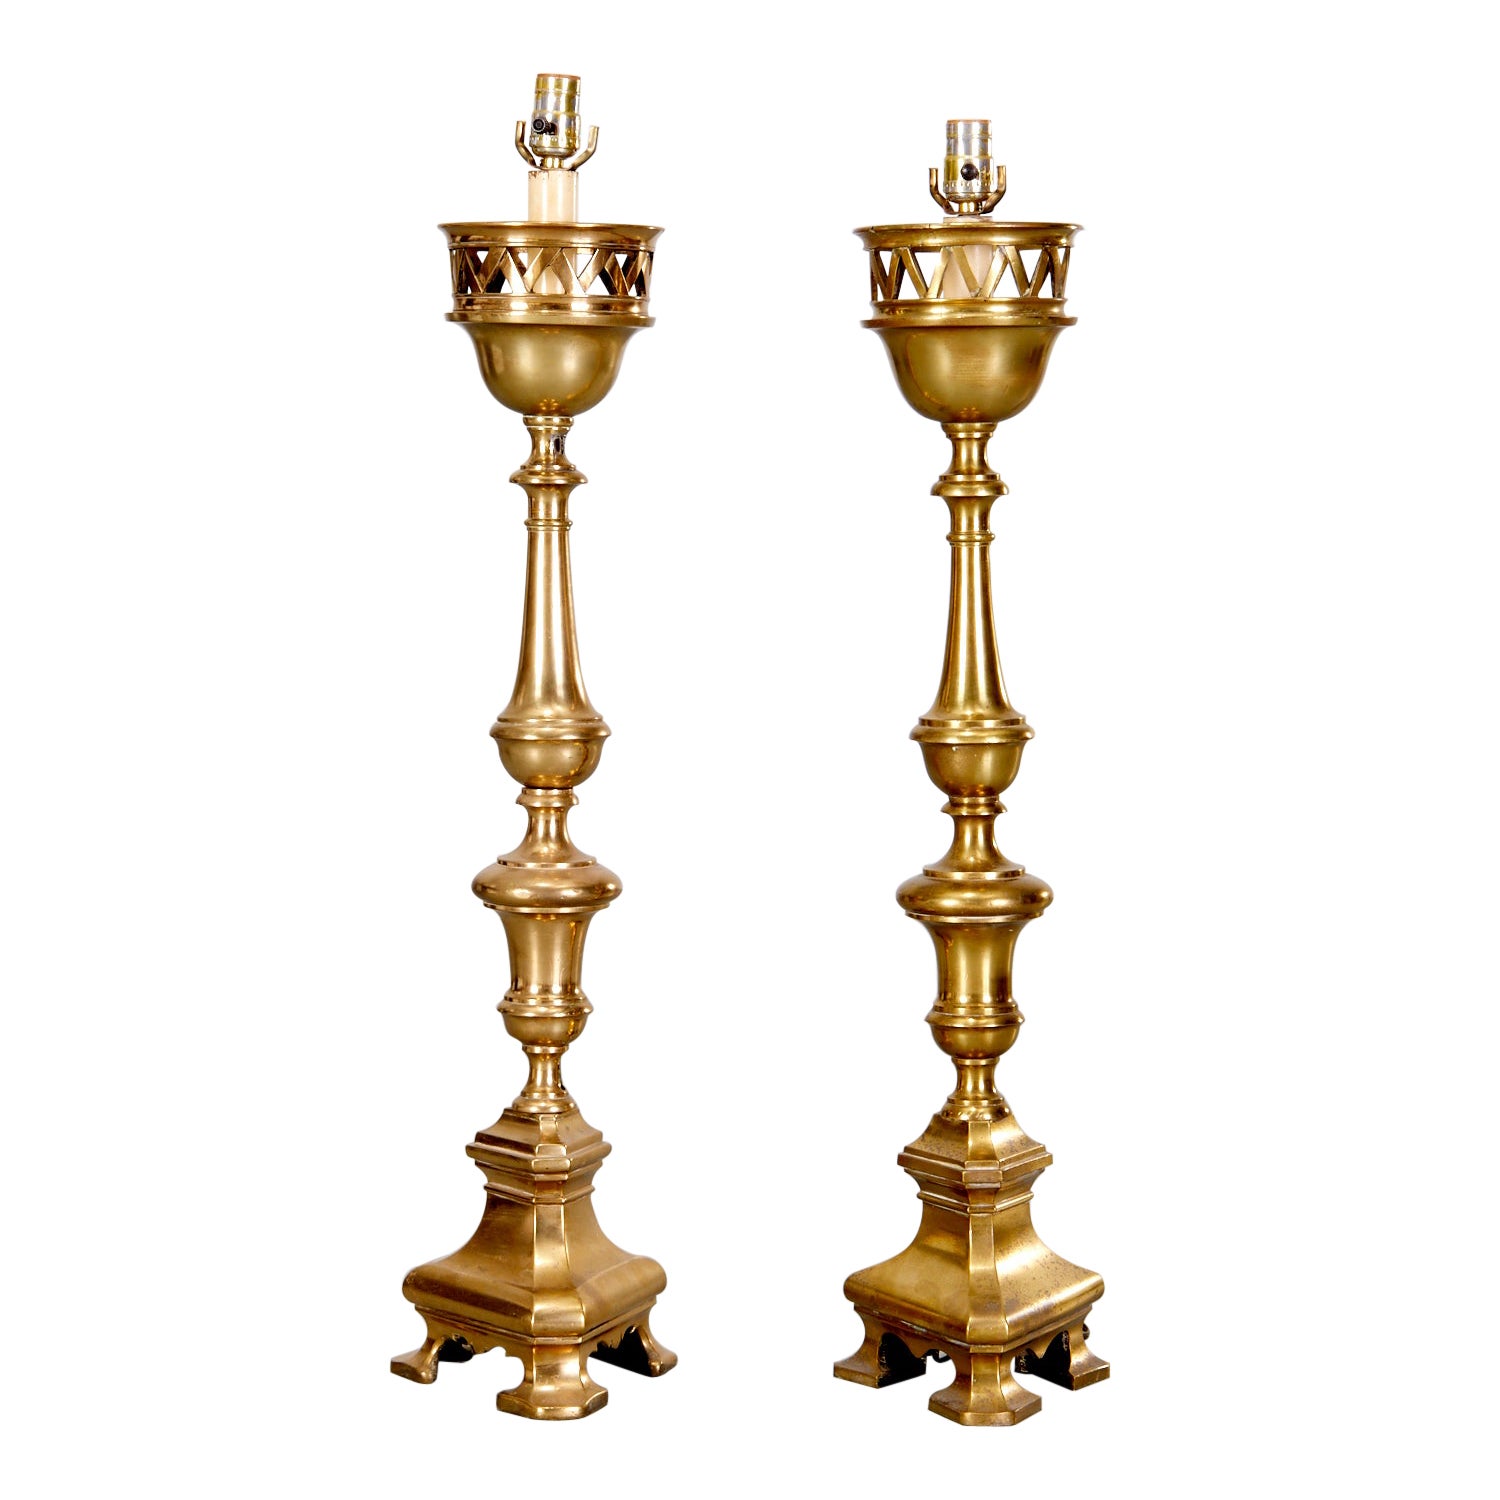 19th C. Pair of Heavy Brass Ecclesiastical Candlesticks Adapted to Table Lamps For Sale